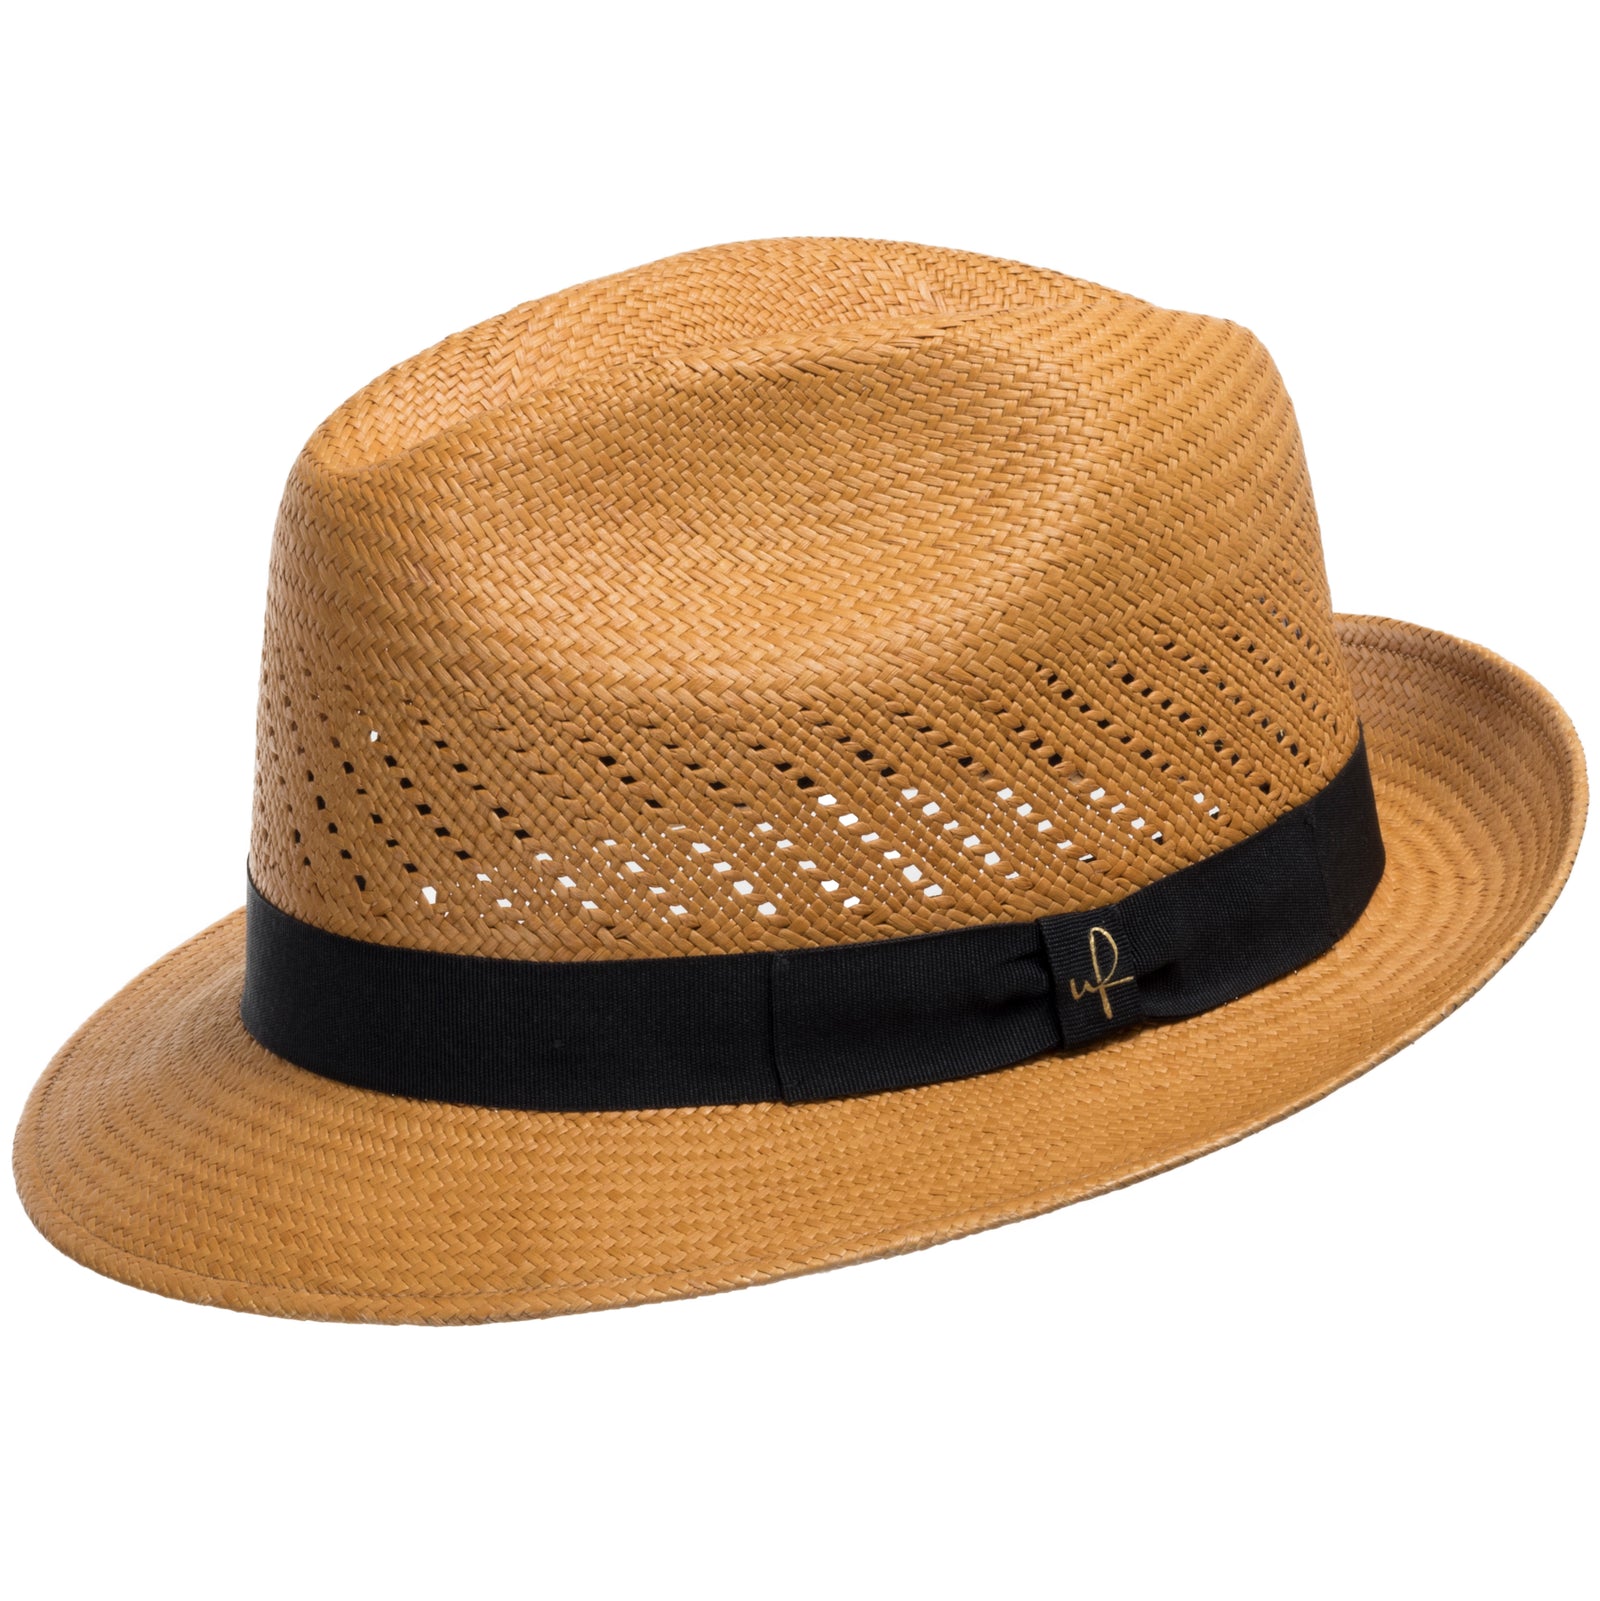 Men's Straw Hats for Sun Protection Online Page 3 - Ultrafino